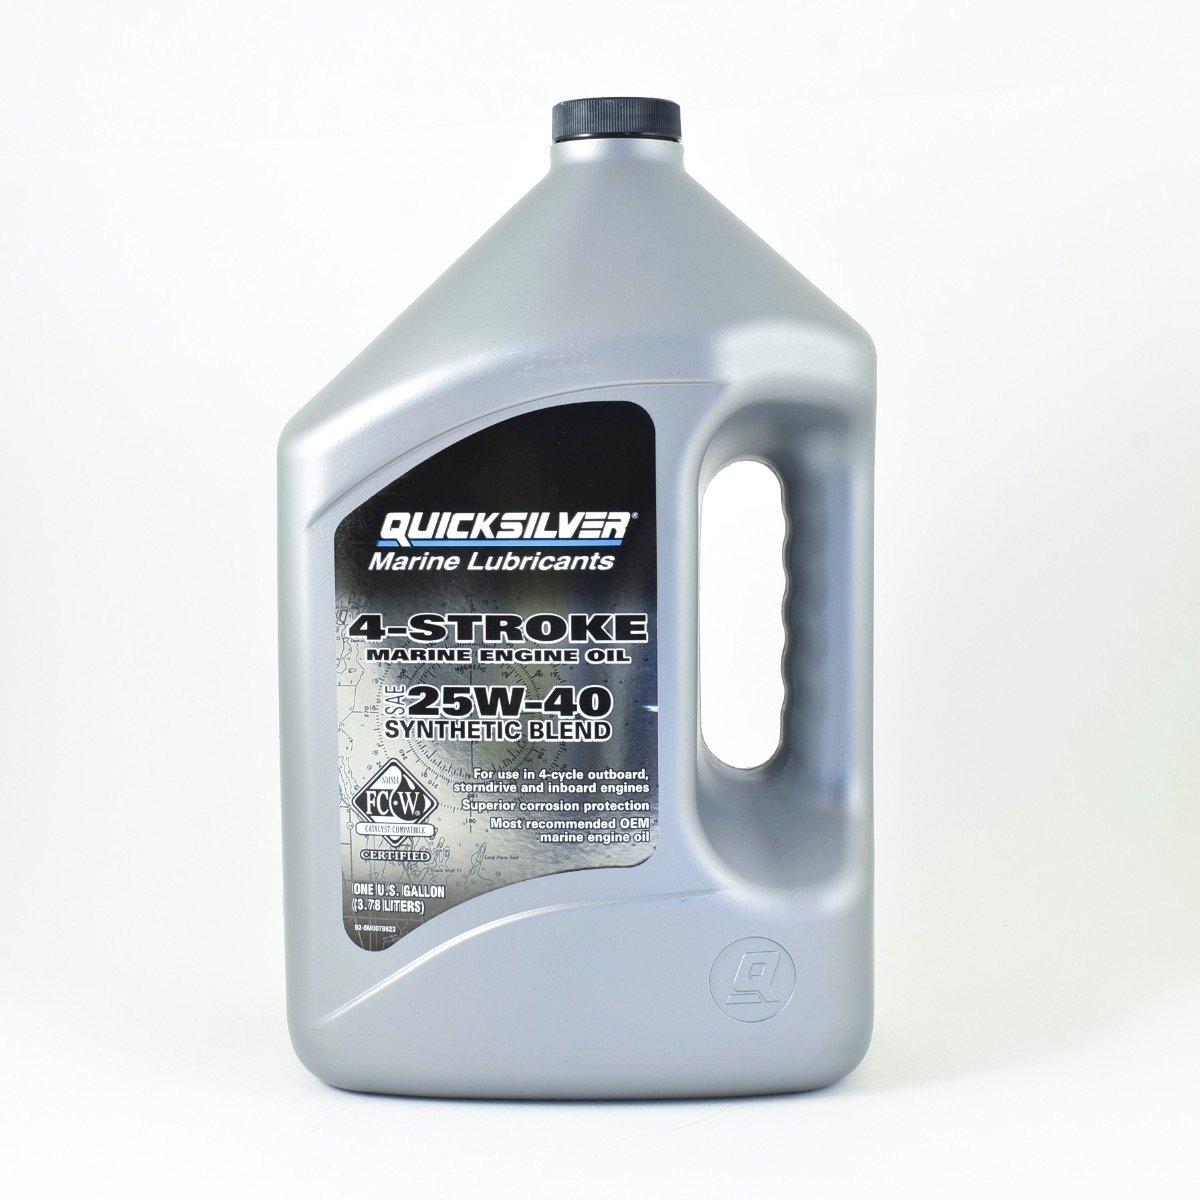 Quicksilver Synthetic Blend 25W40 Oil 92-8M0078623